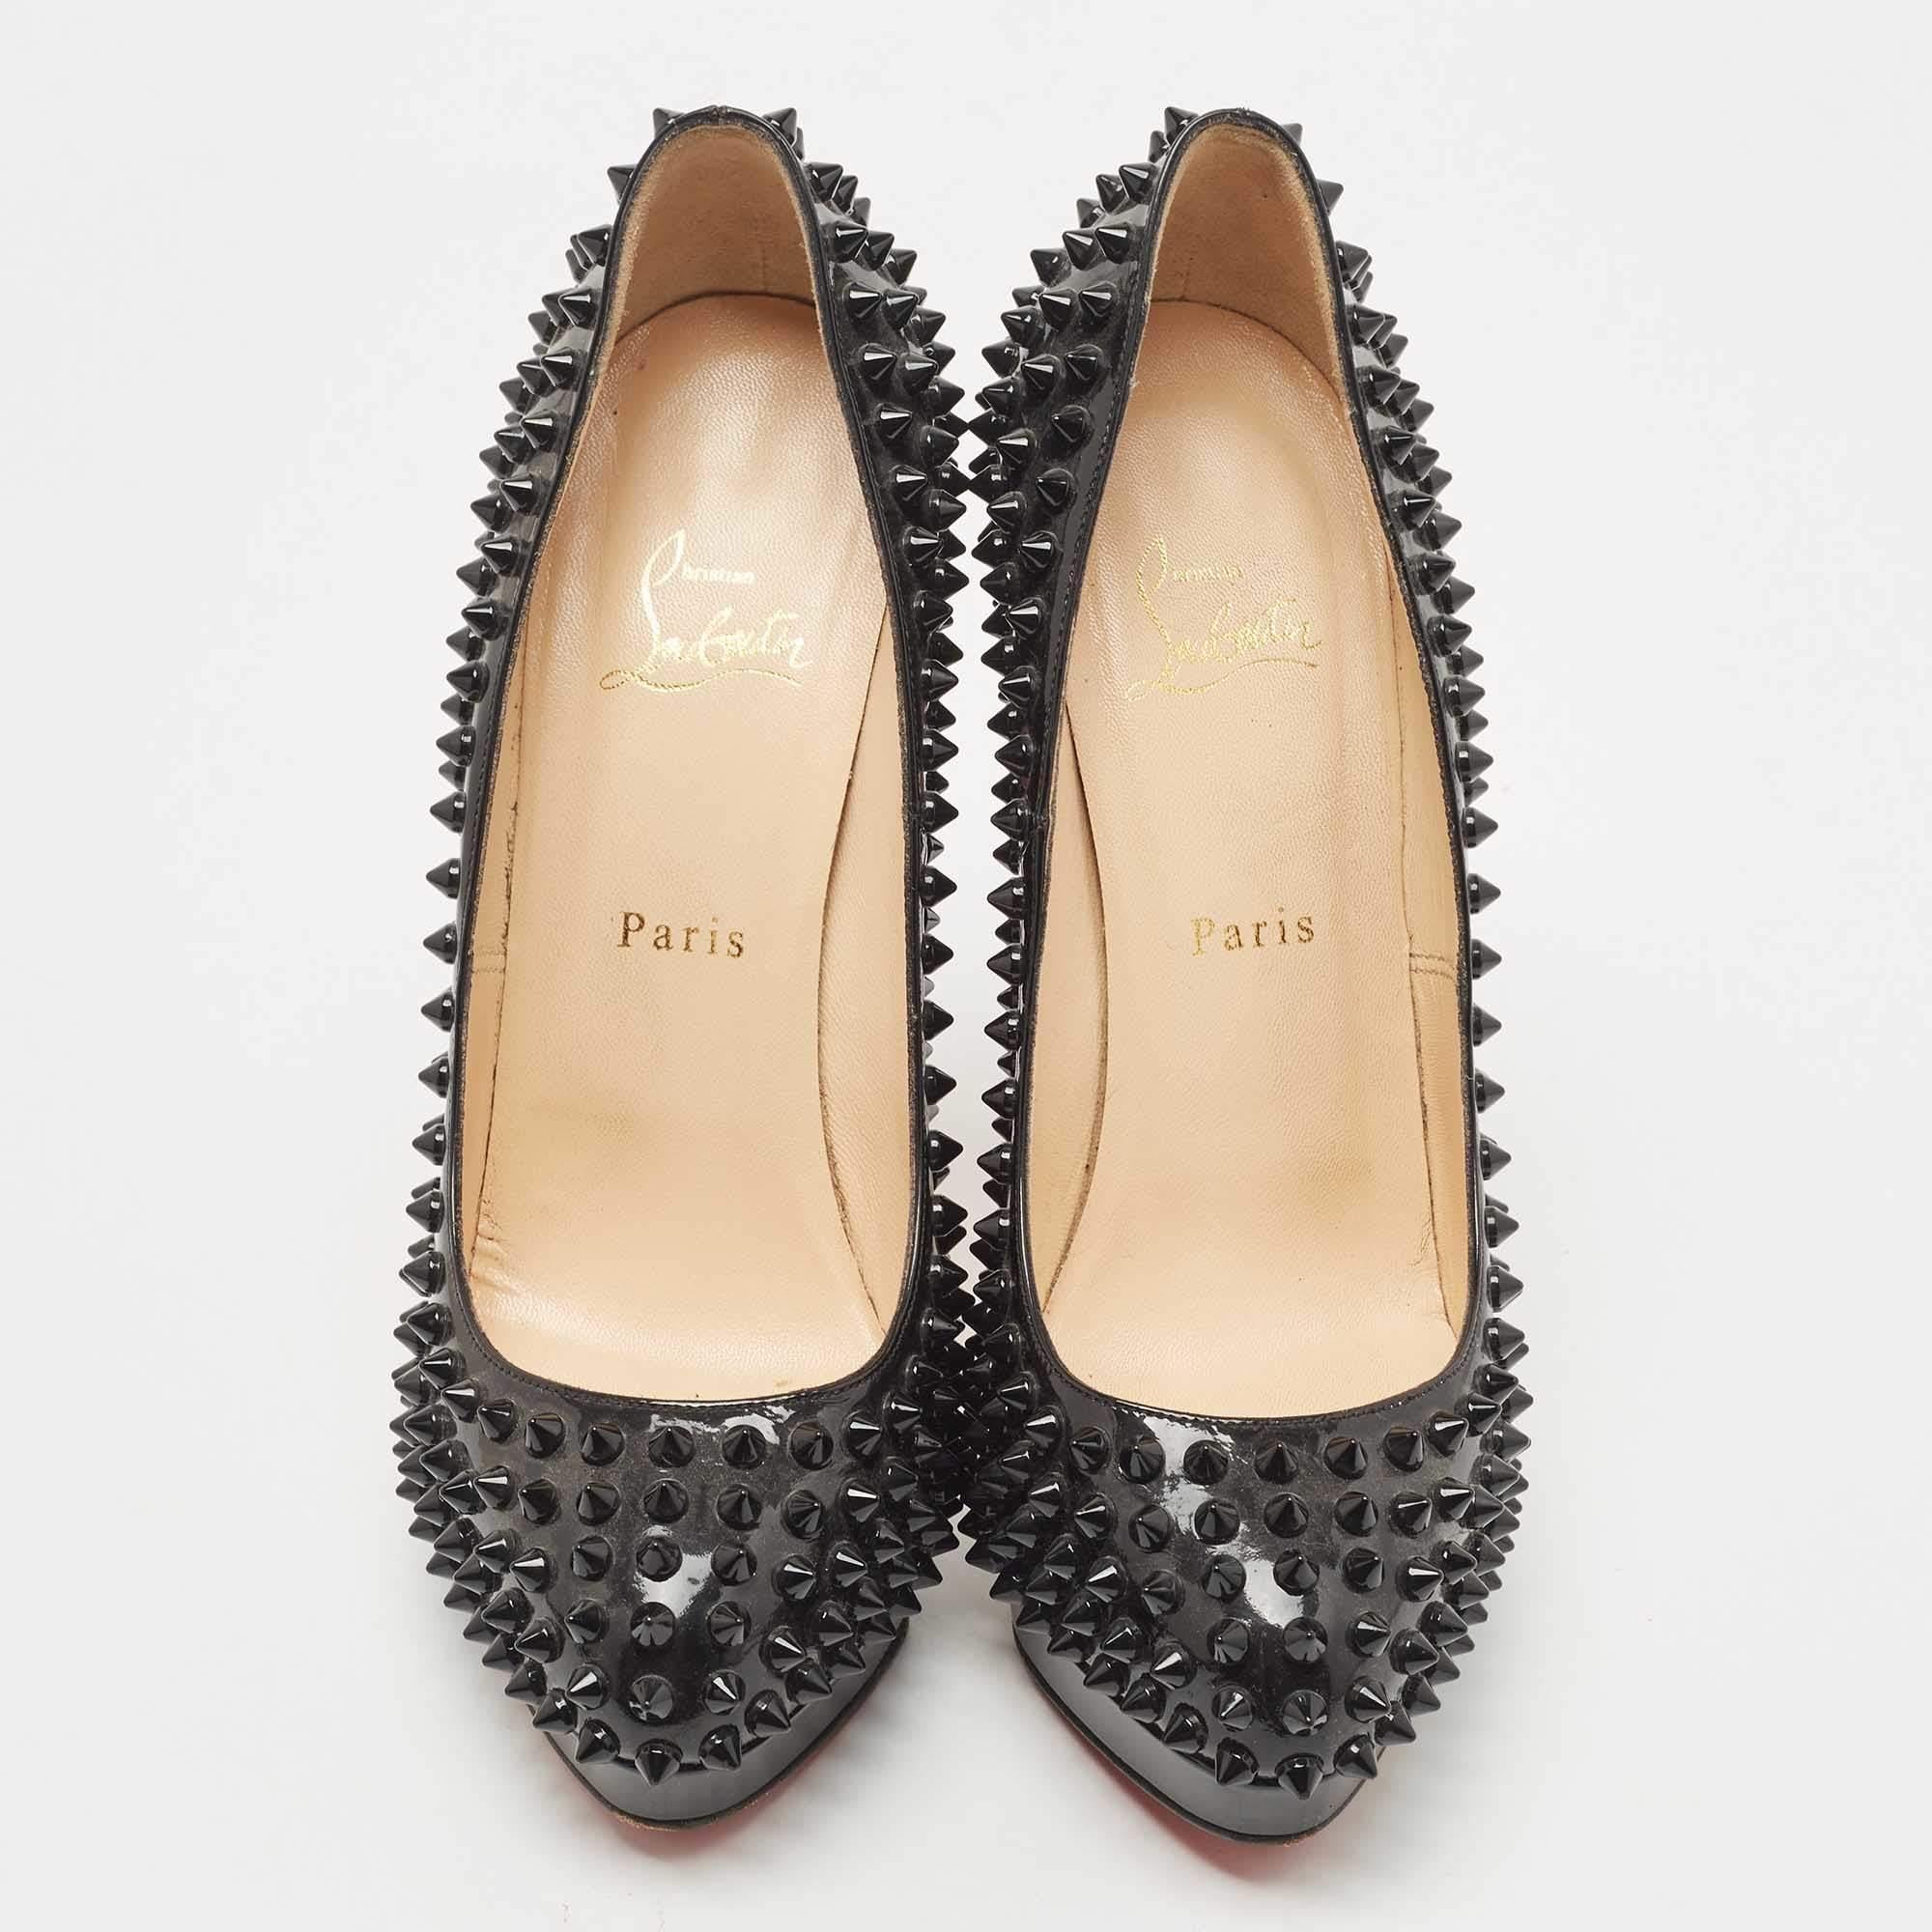 Wonderfully-crafted shoes added with notable elements to fit well and pair perfectly with all your plans. Make these Christian Louboutin spike pumps yours today!

